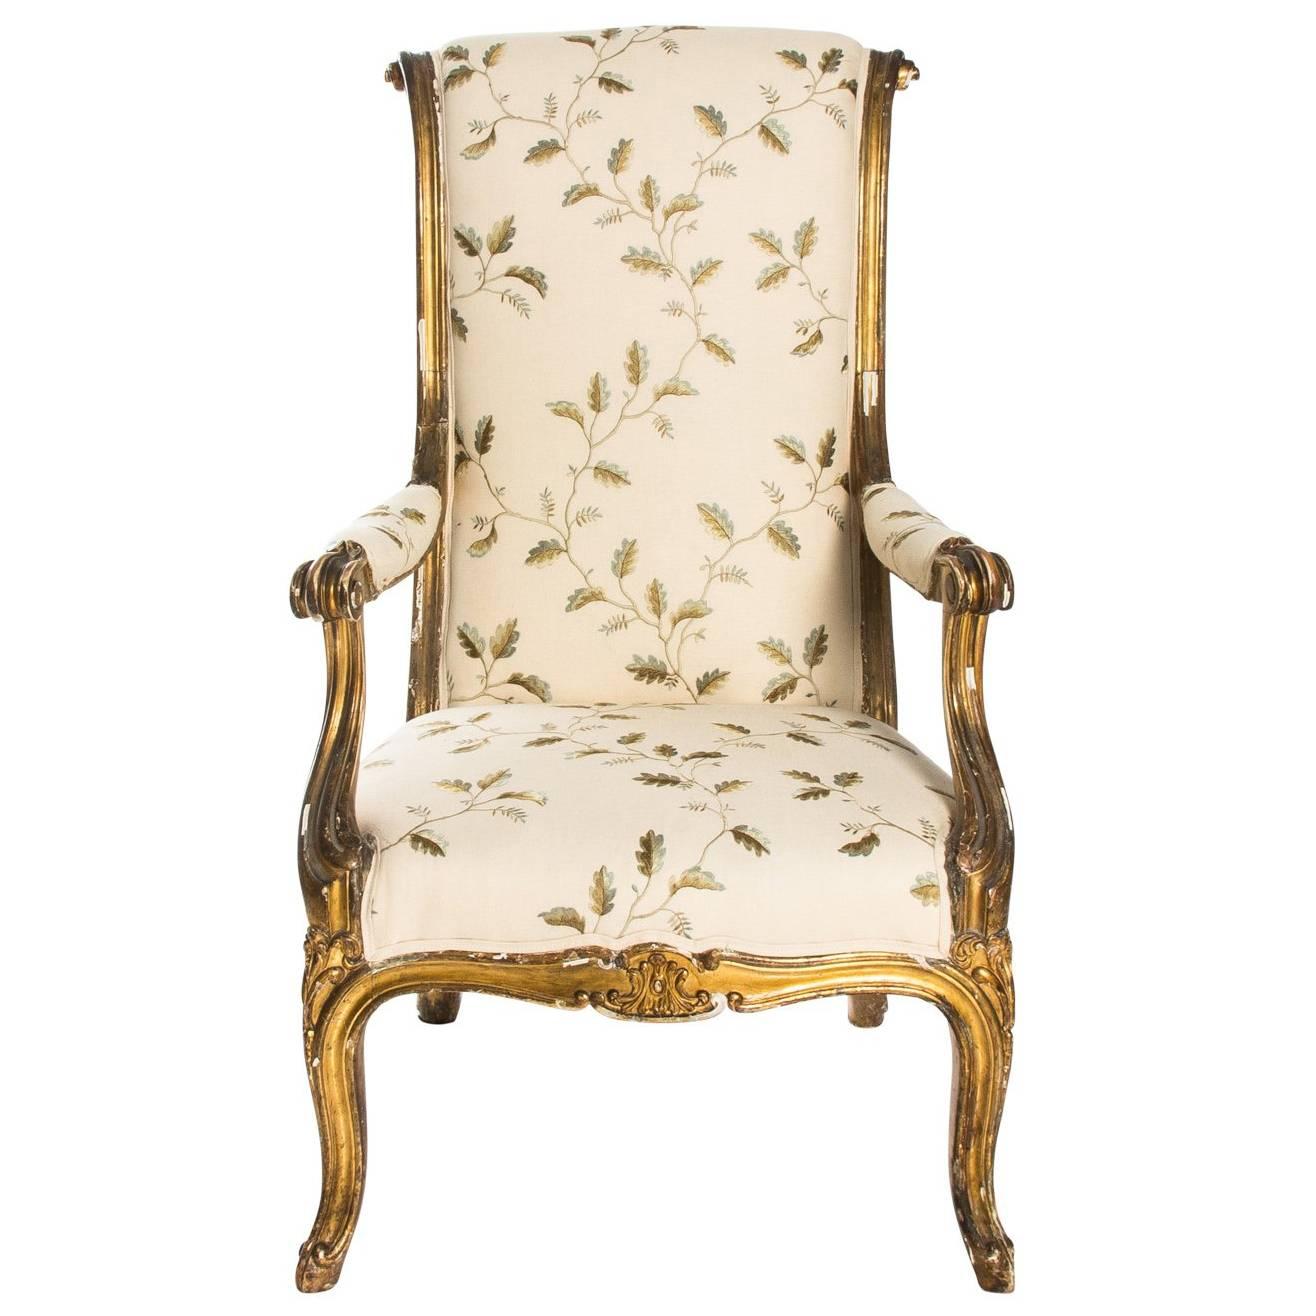 Upholstered Russian Open Armchair